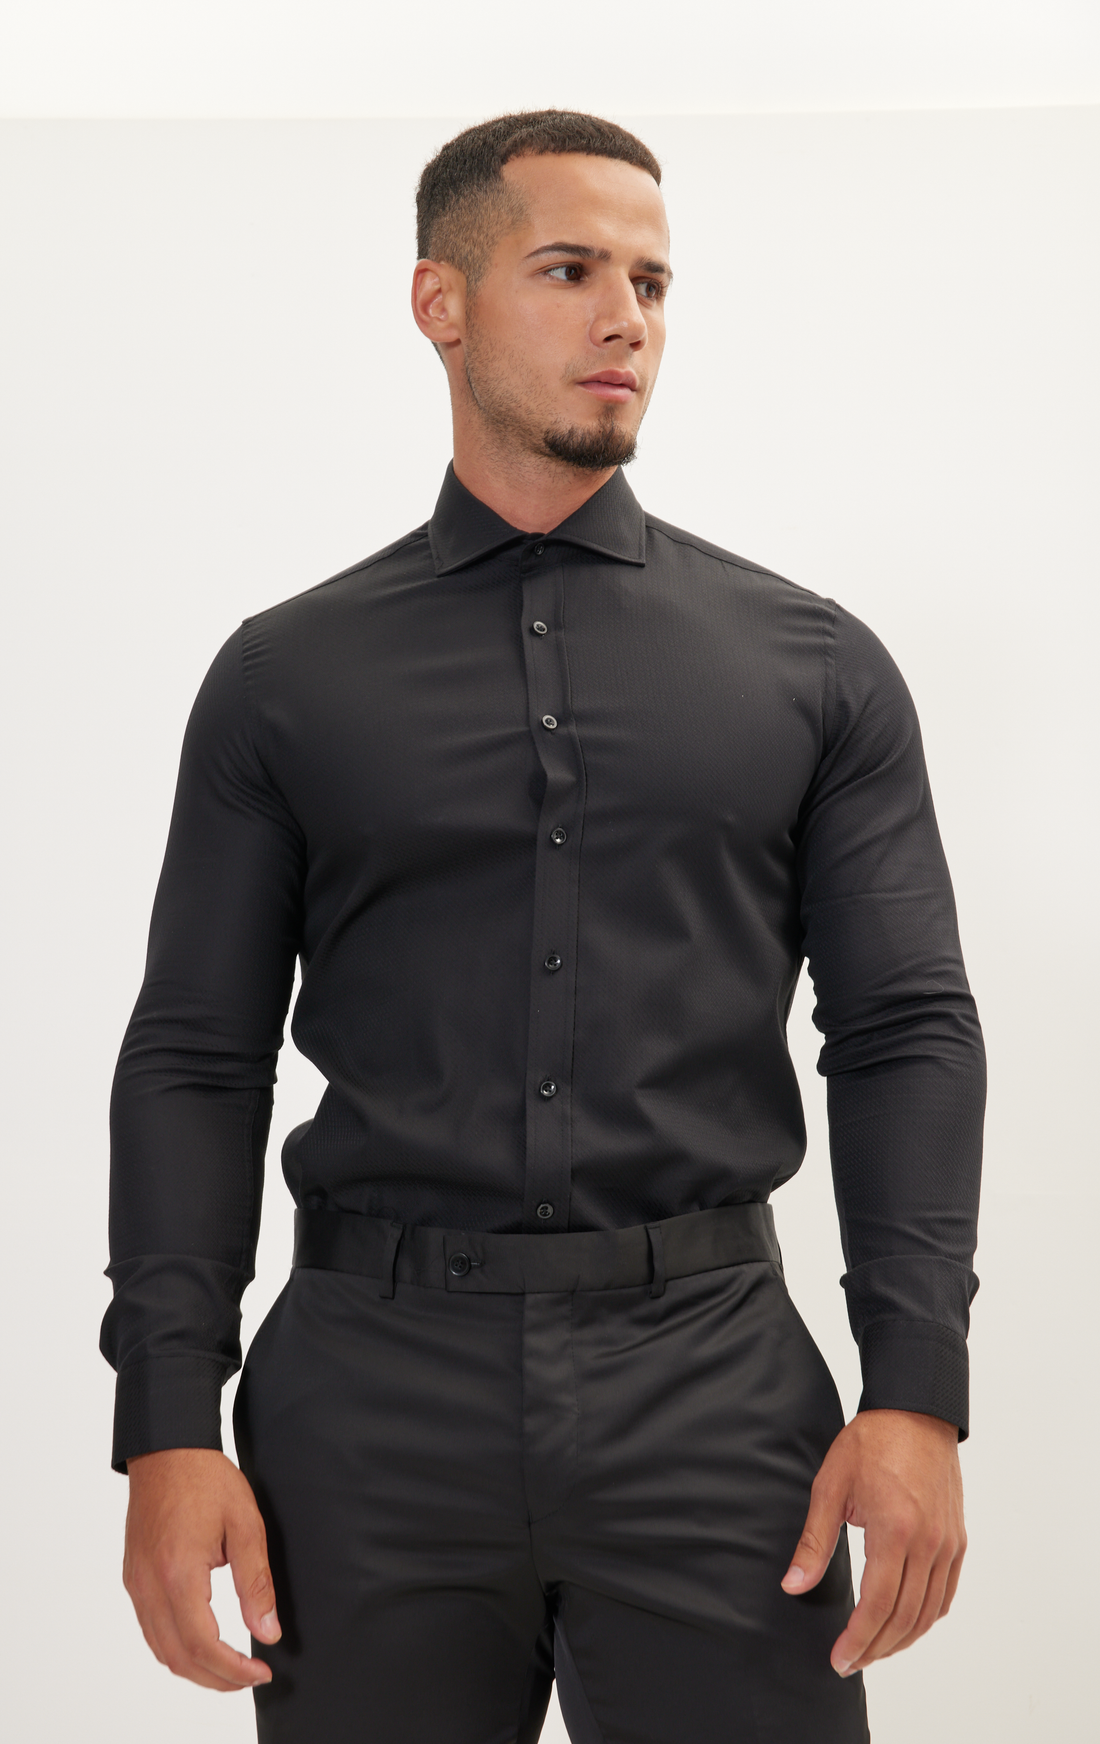 N° 4802A PURE COTTON FRONT PLACKET SPREAD COLLAR DRESS SHIRT - BLACK